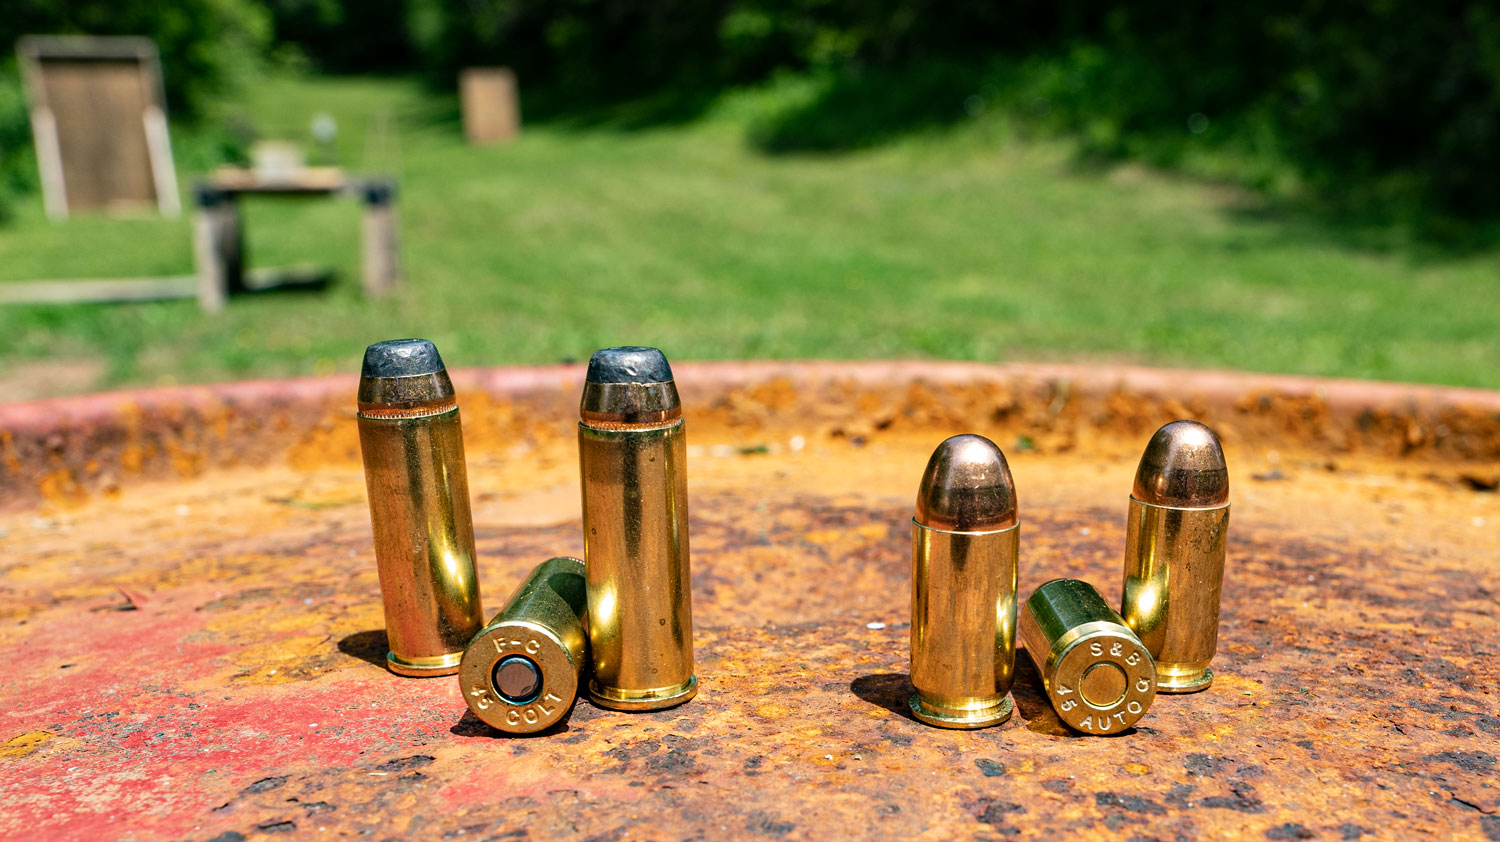 45 LC and 45 ACP ammo side by side